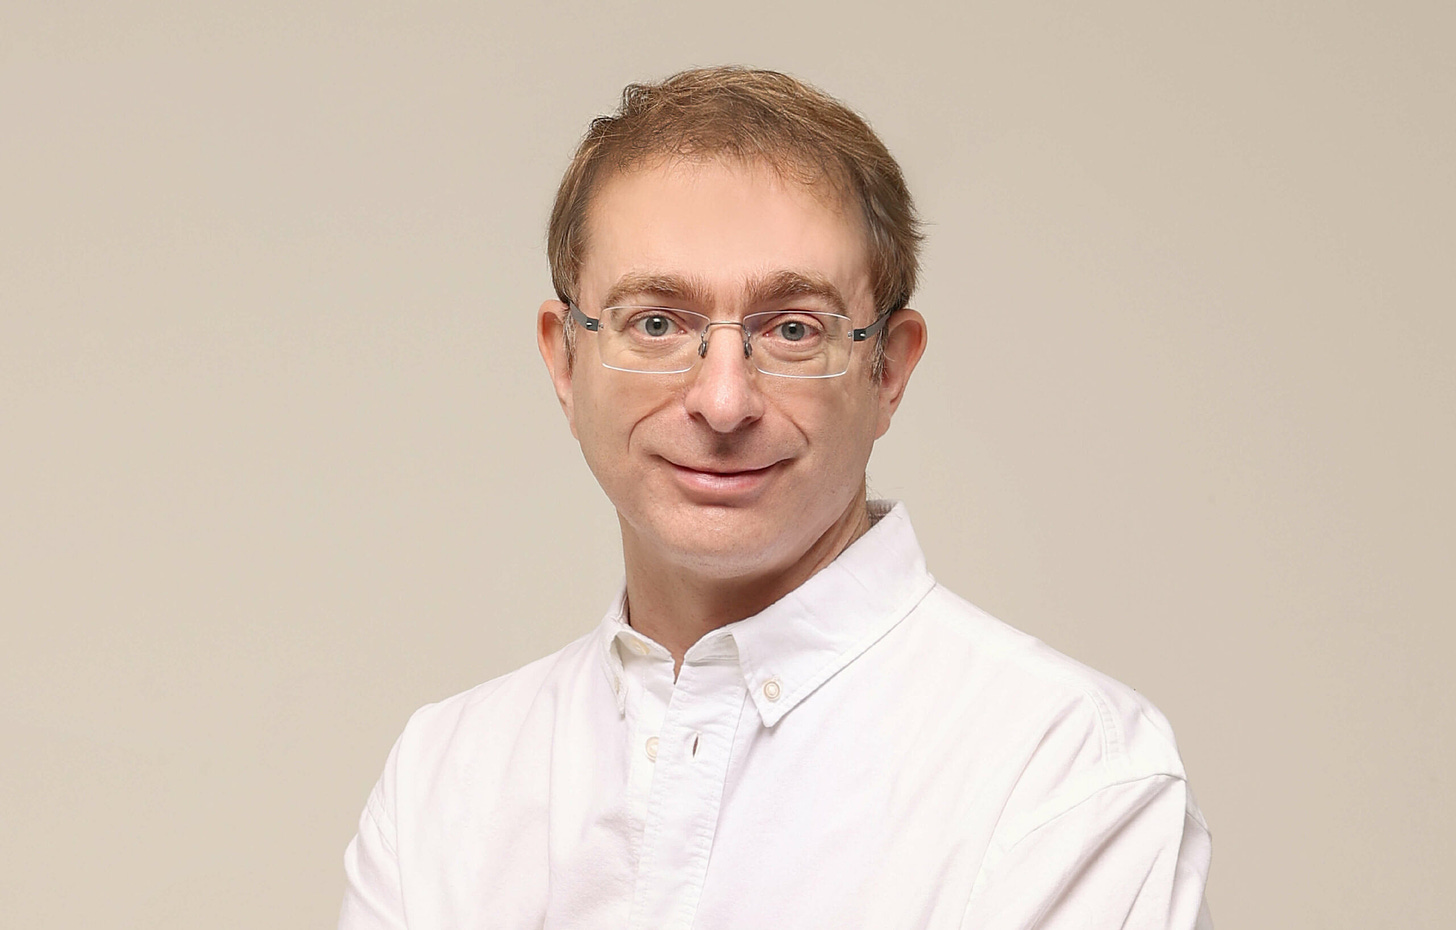 Quarter-length portrait of Tailscale CEO Avery Pennarun, who is wearing a white button-down shirt and rimless, rectangular glasses